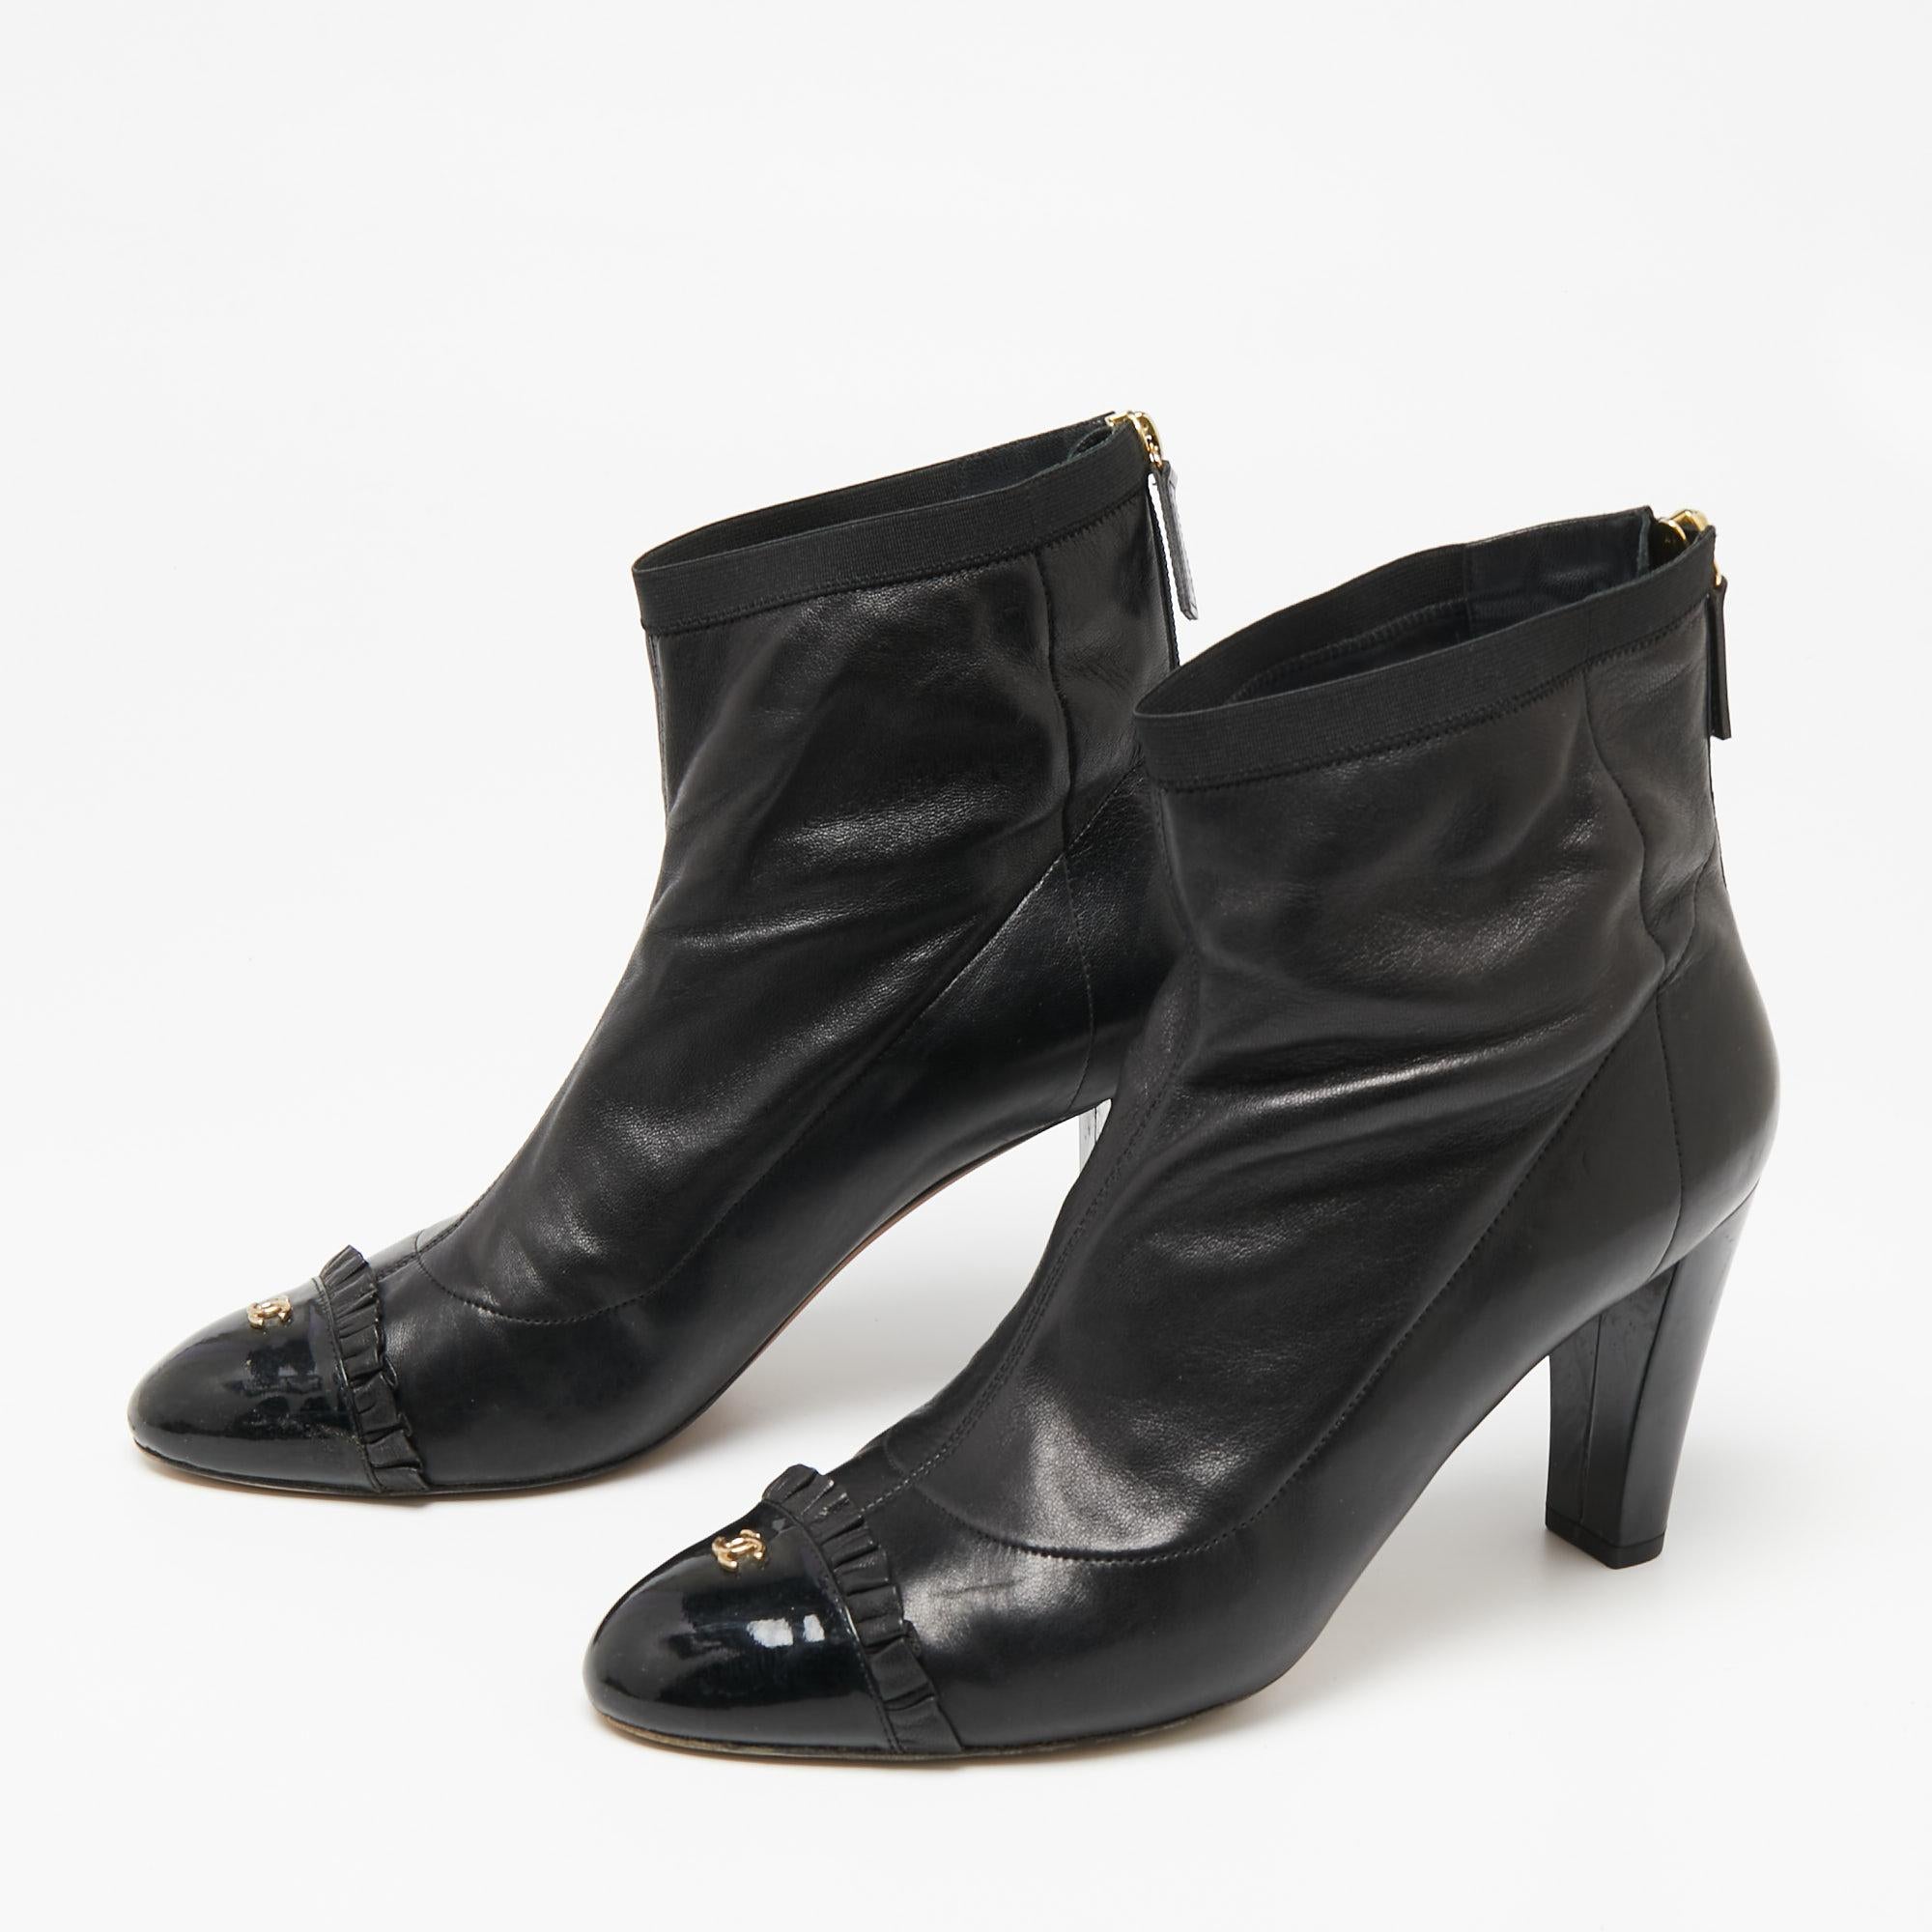 No fashion quest is complete without a pair of boots like these black ones from Chanel. They are crafted from leather and feature patent leather cap toes with the CC logos. The ankle boots are complete with smooth insoles and 9 cm heels to lift you